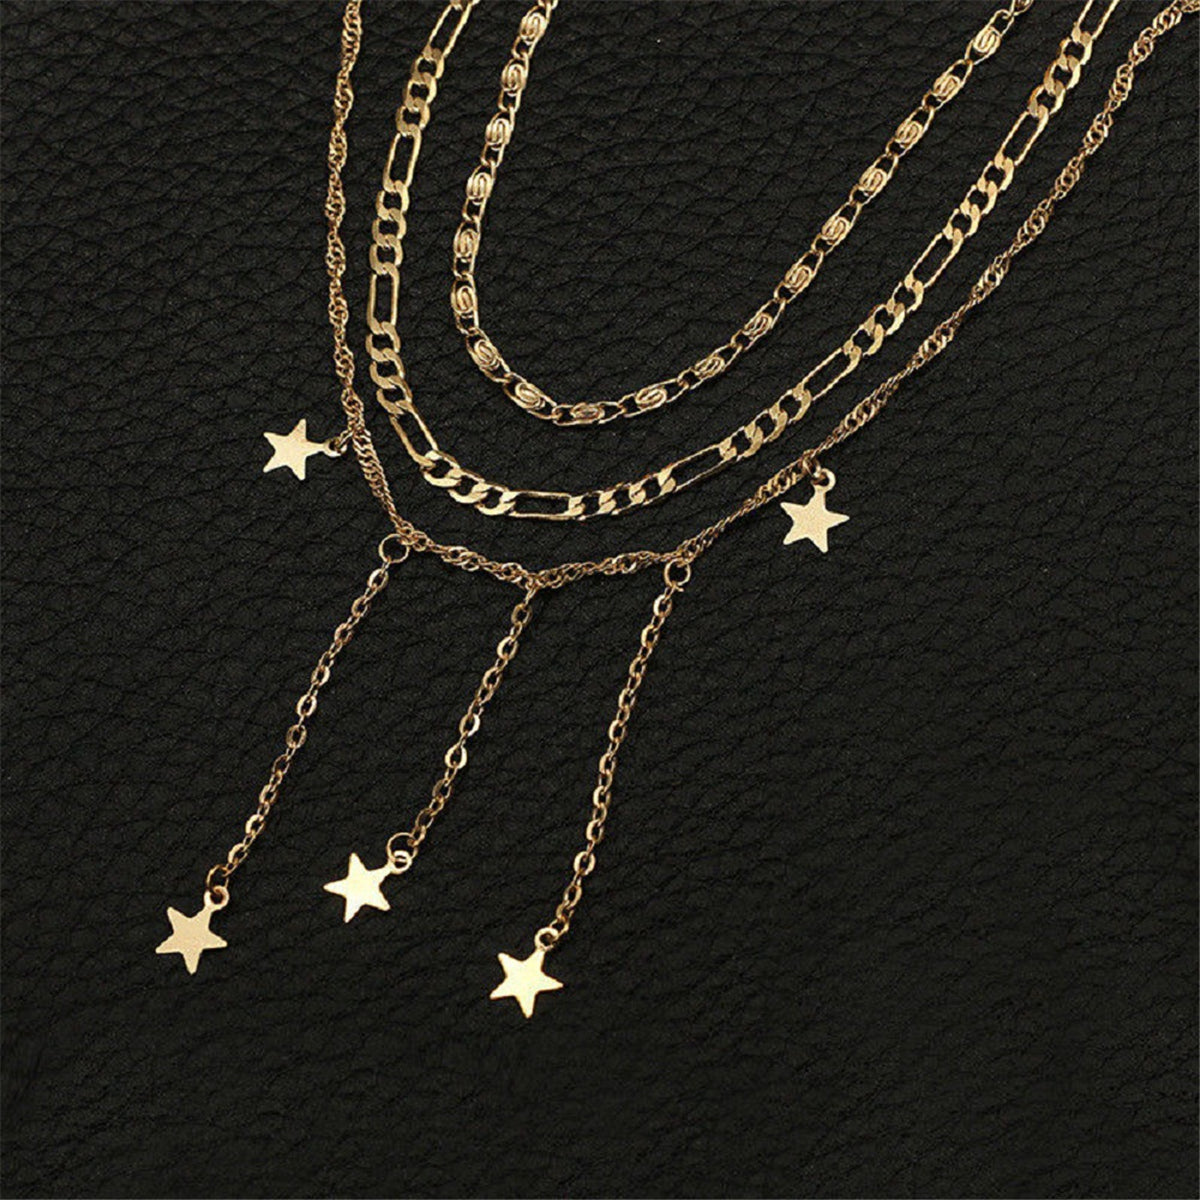 18K Gold-Plated Star Drop Layered Choker Necklace